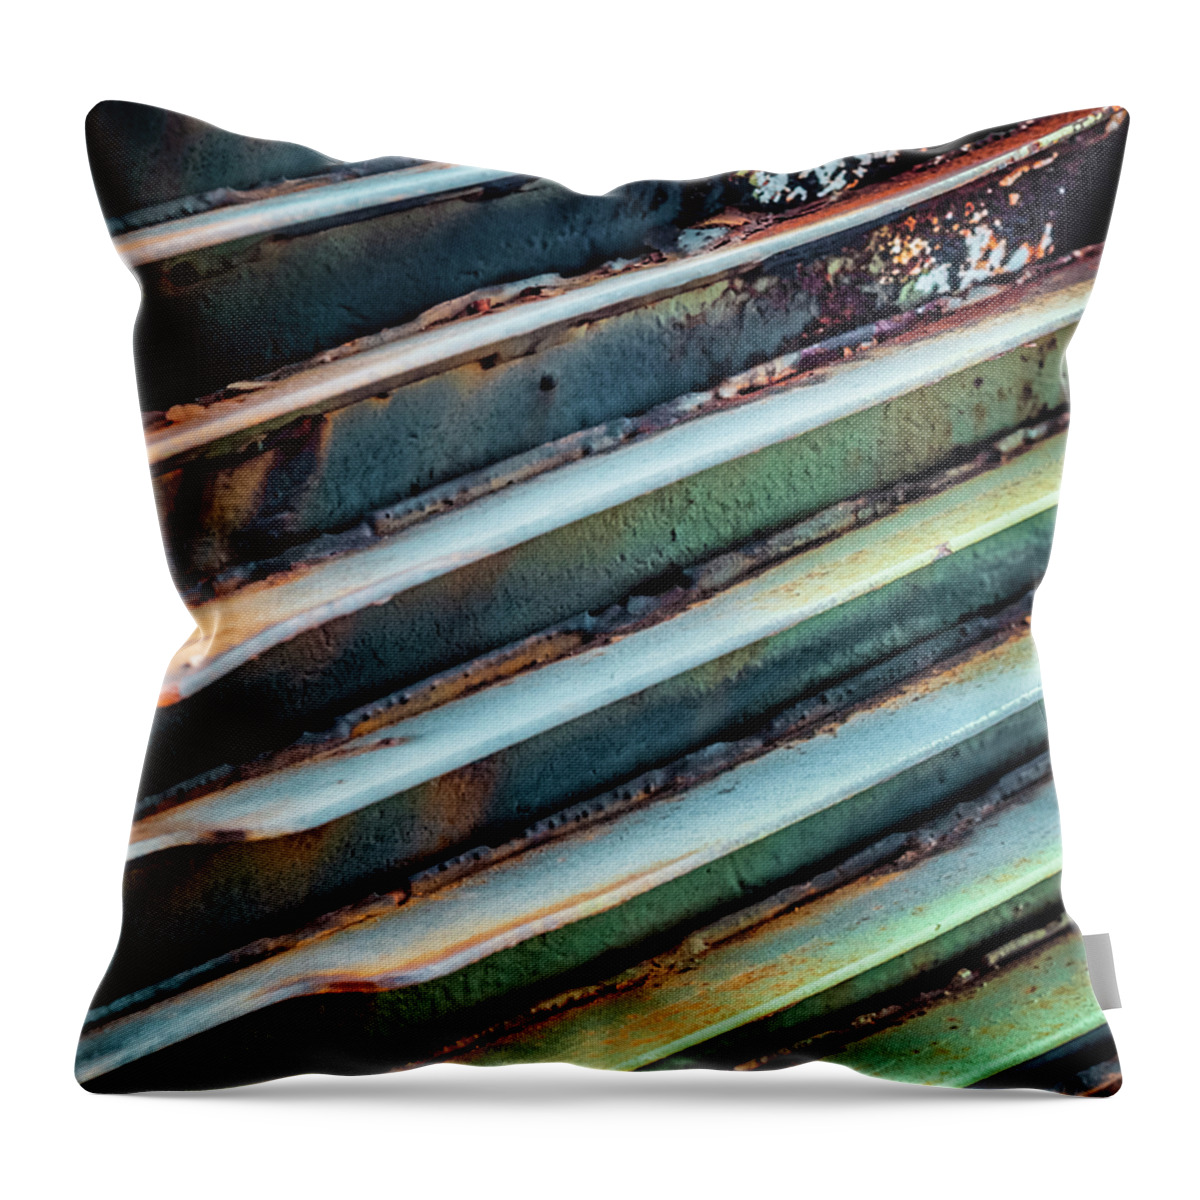 Abstract Throw Pillow featuring the photograph Colorful Corrosion by Christi Kraft